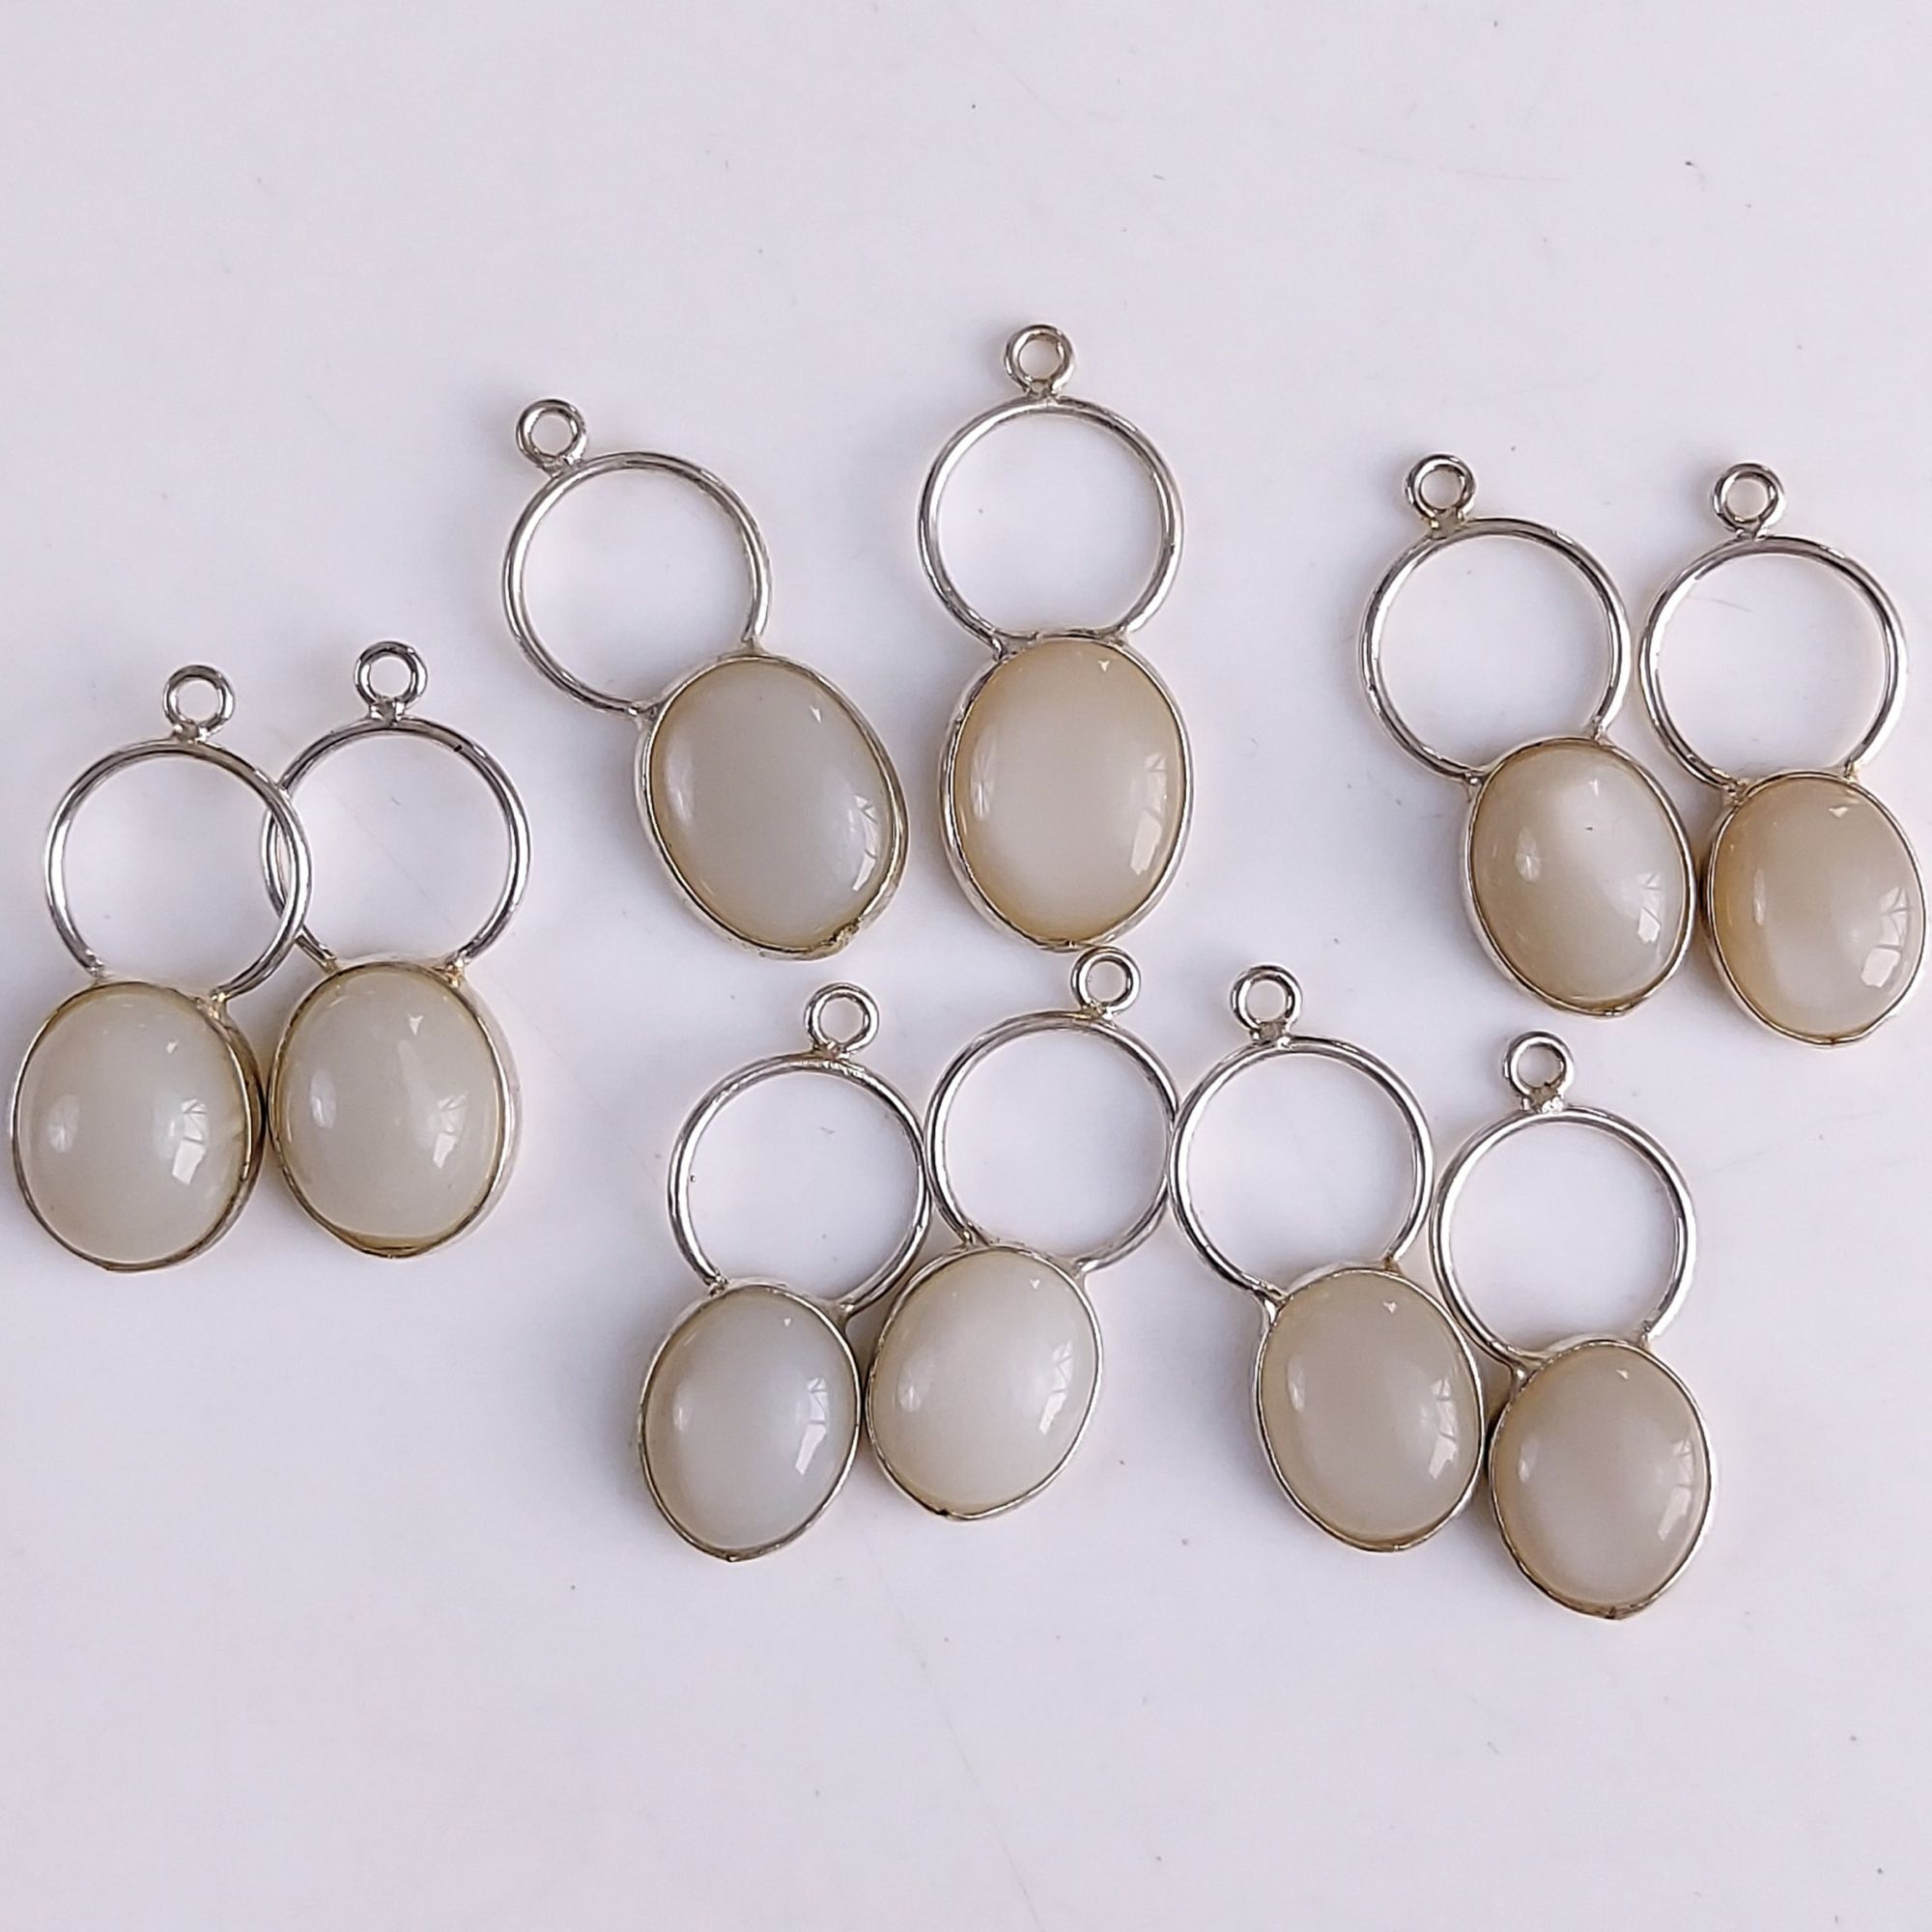 5Pair 135Cts Natural White Moonstone Gemstone Silver Plated Earring Pair Connector Lot 13x10mm#567